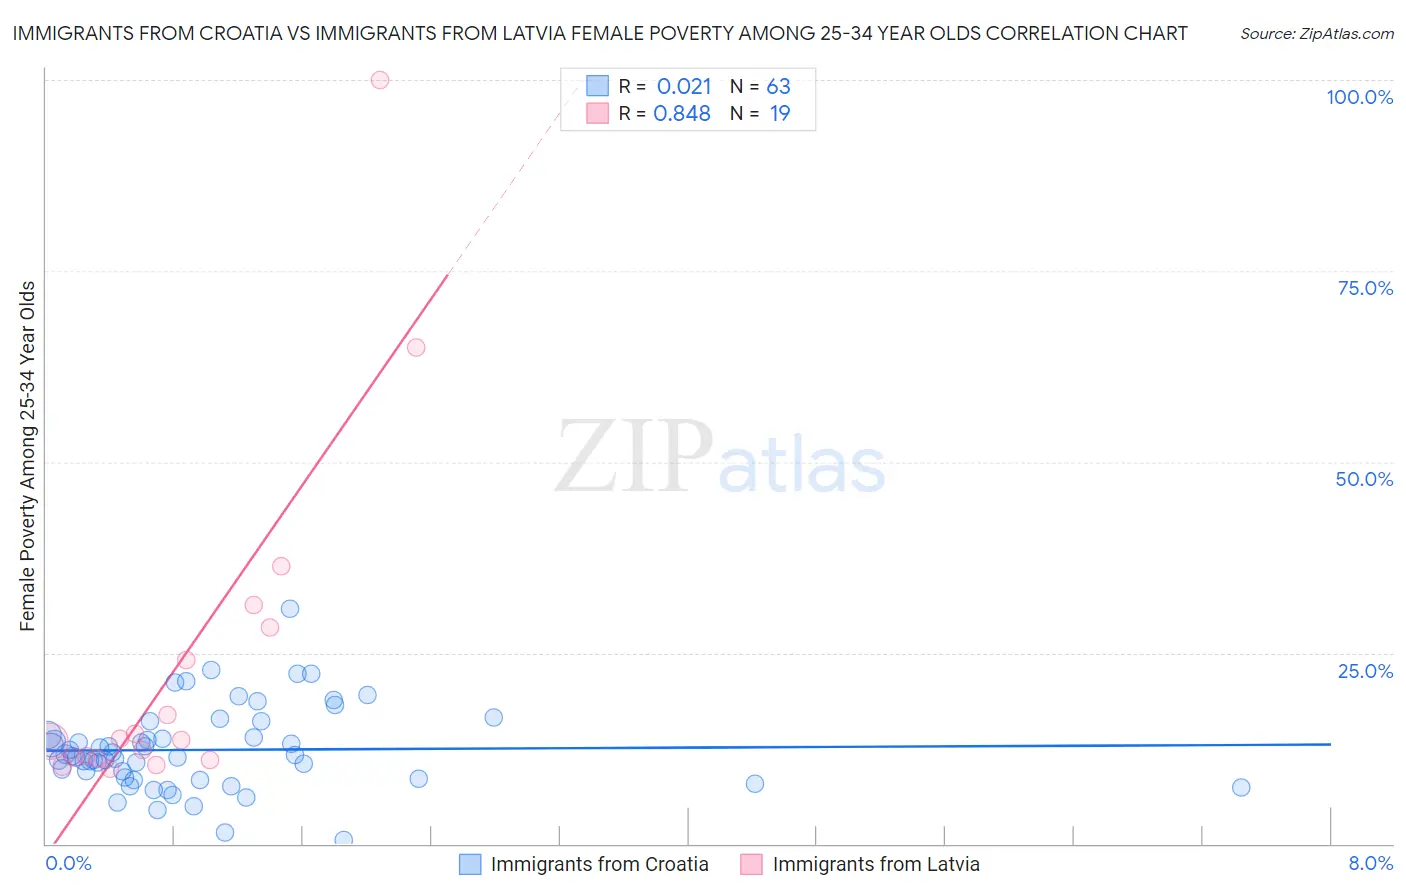 Immigrants from Croatia vs Immigrants from Latvia Female Poverty Among 25-34 Year Olds